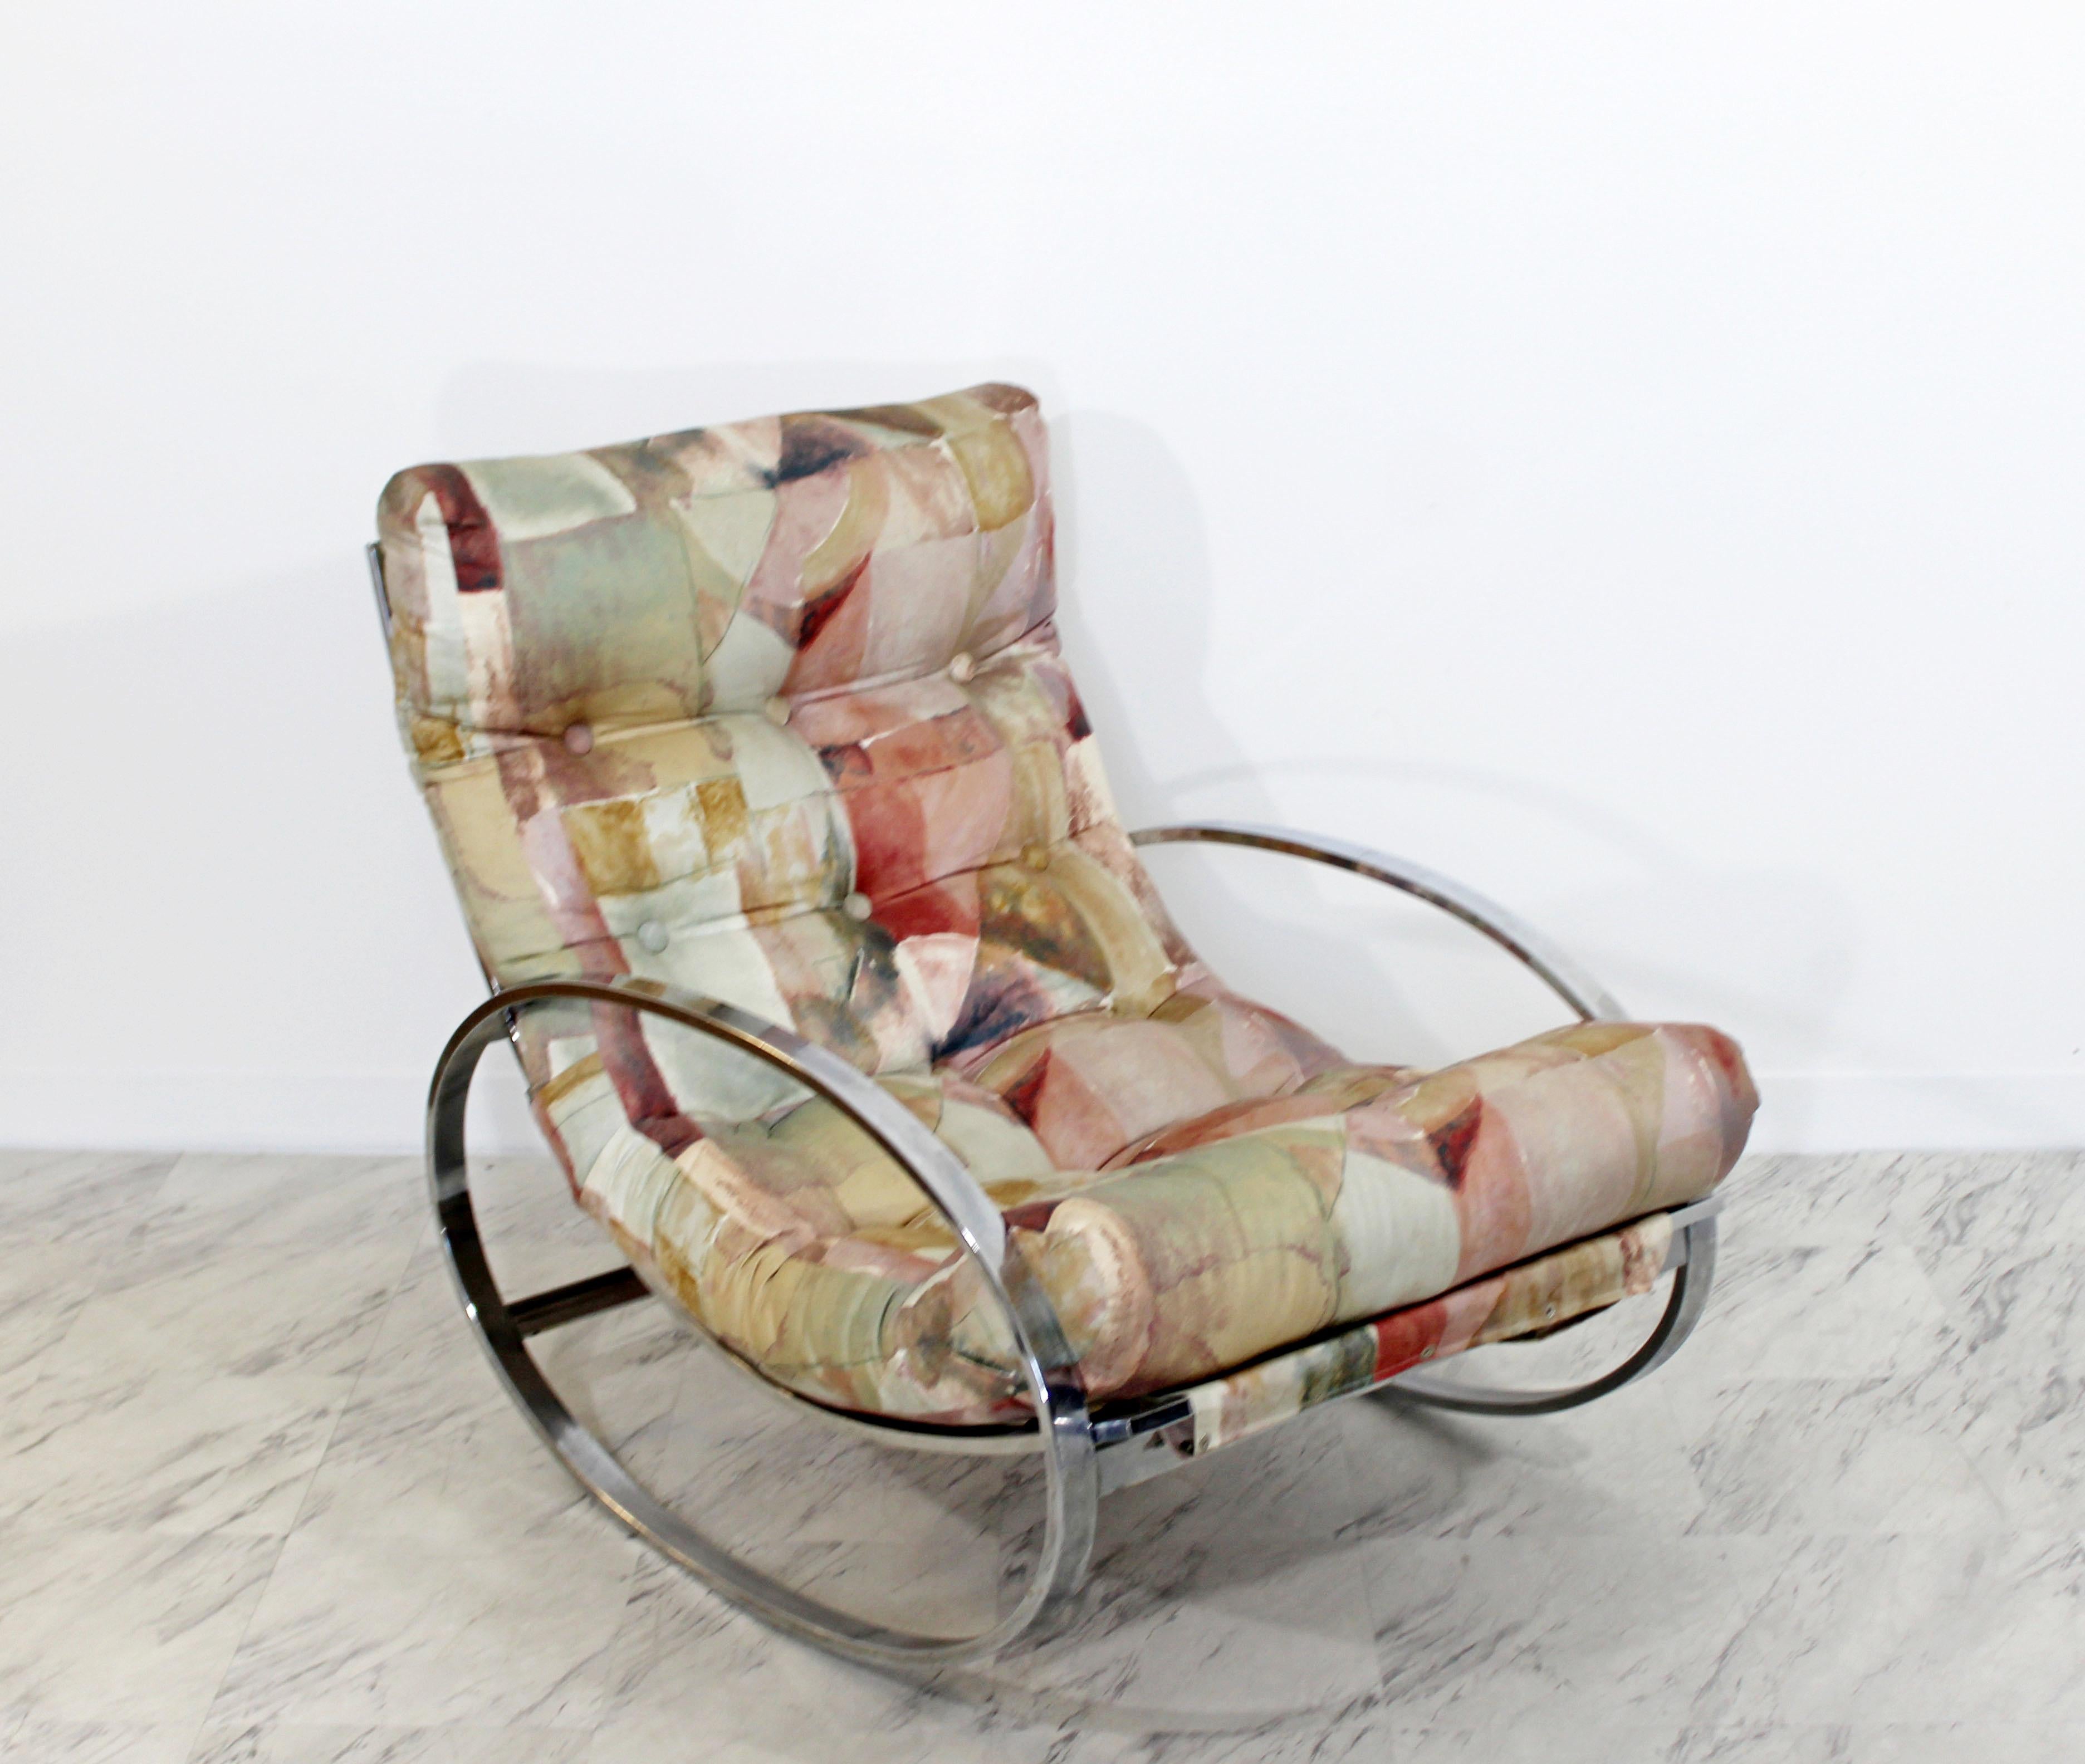 For your consideration is a fabulous, flat bar polished elliptical chrome rocker or rocking chair, with a floral upholstery, by Renato Zevi, made in Italy, circa 1970s. In excellent condition. The dimensions are 28